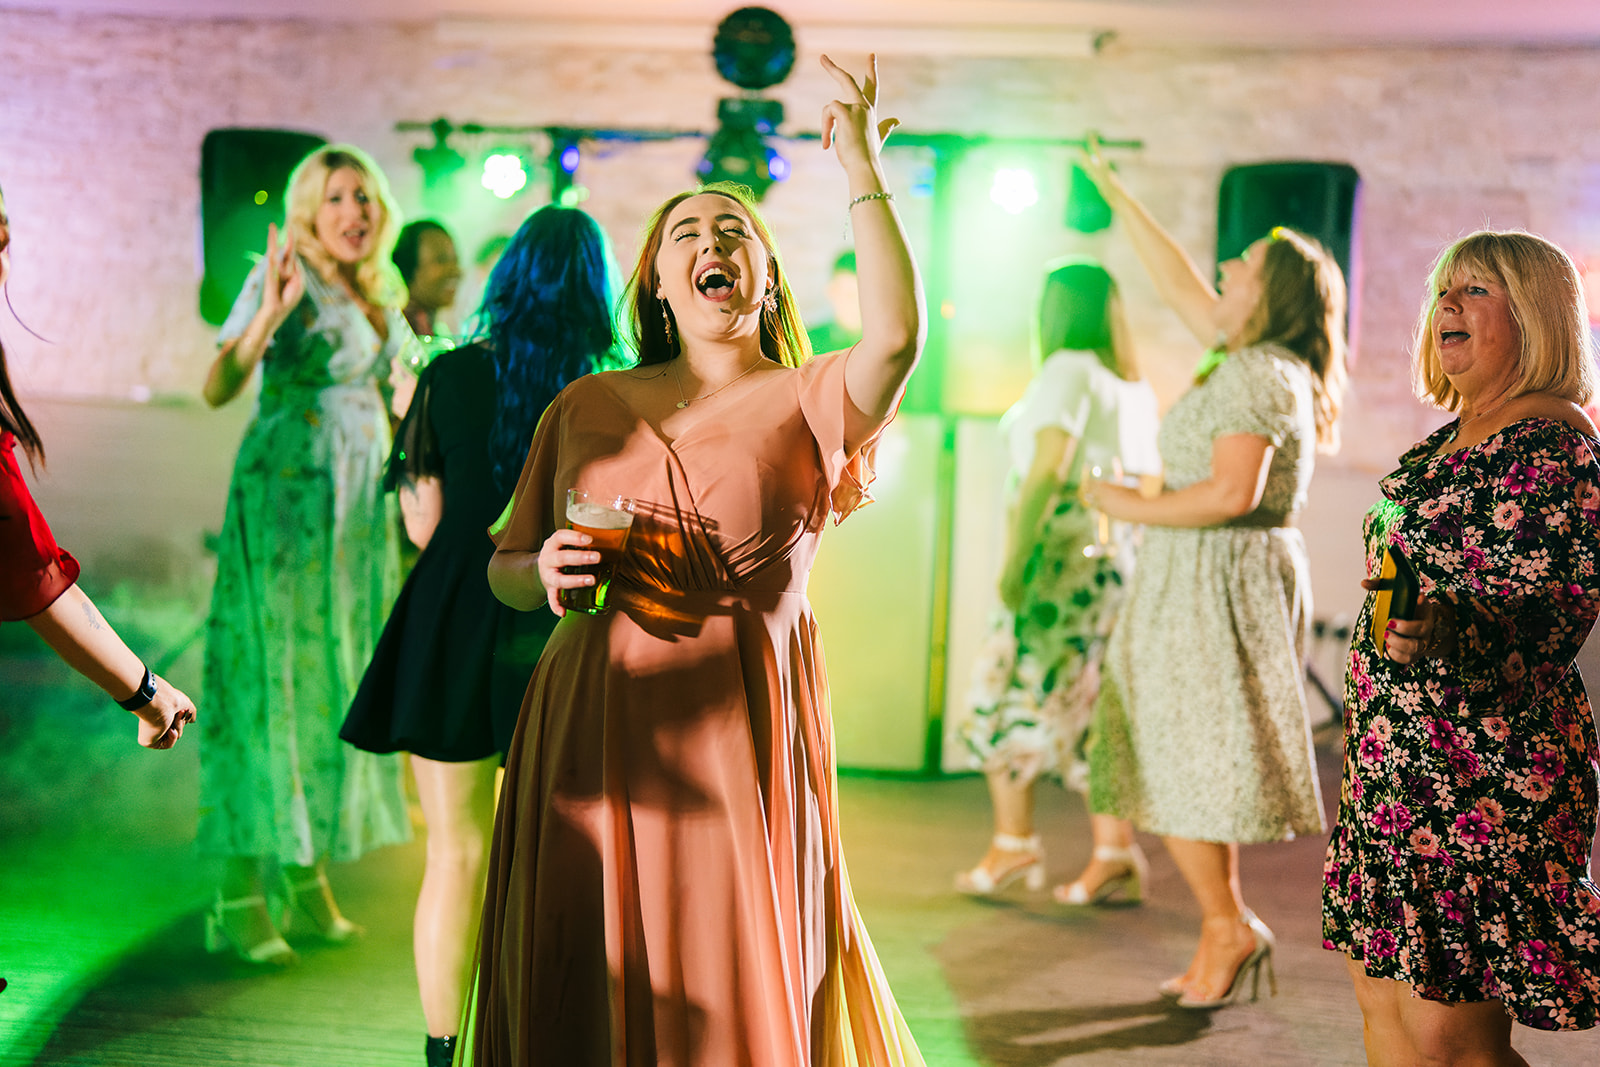 The Brewhouse & Kitchen Wedding Photography - bridesmaid dancing during the wedding disco